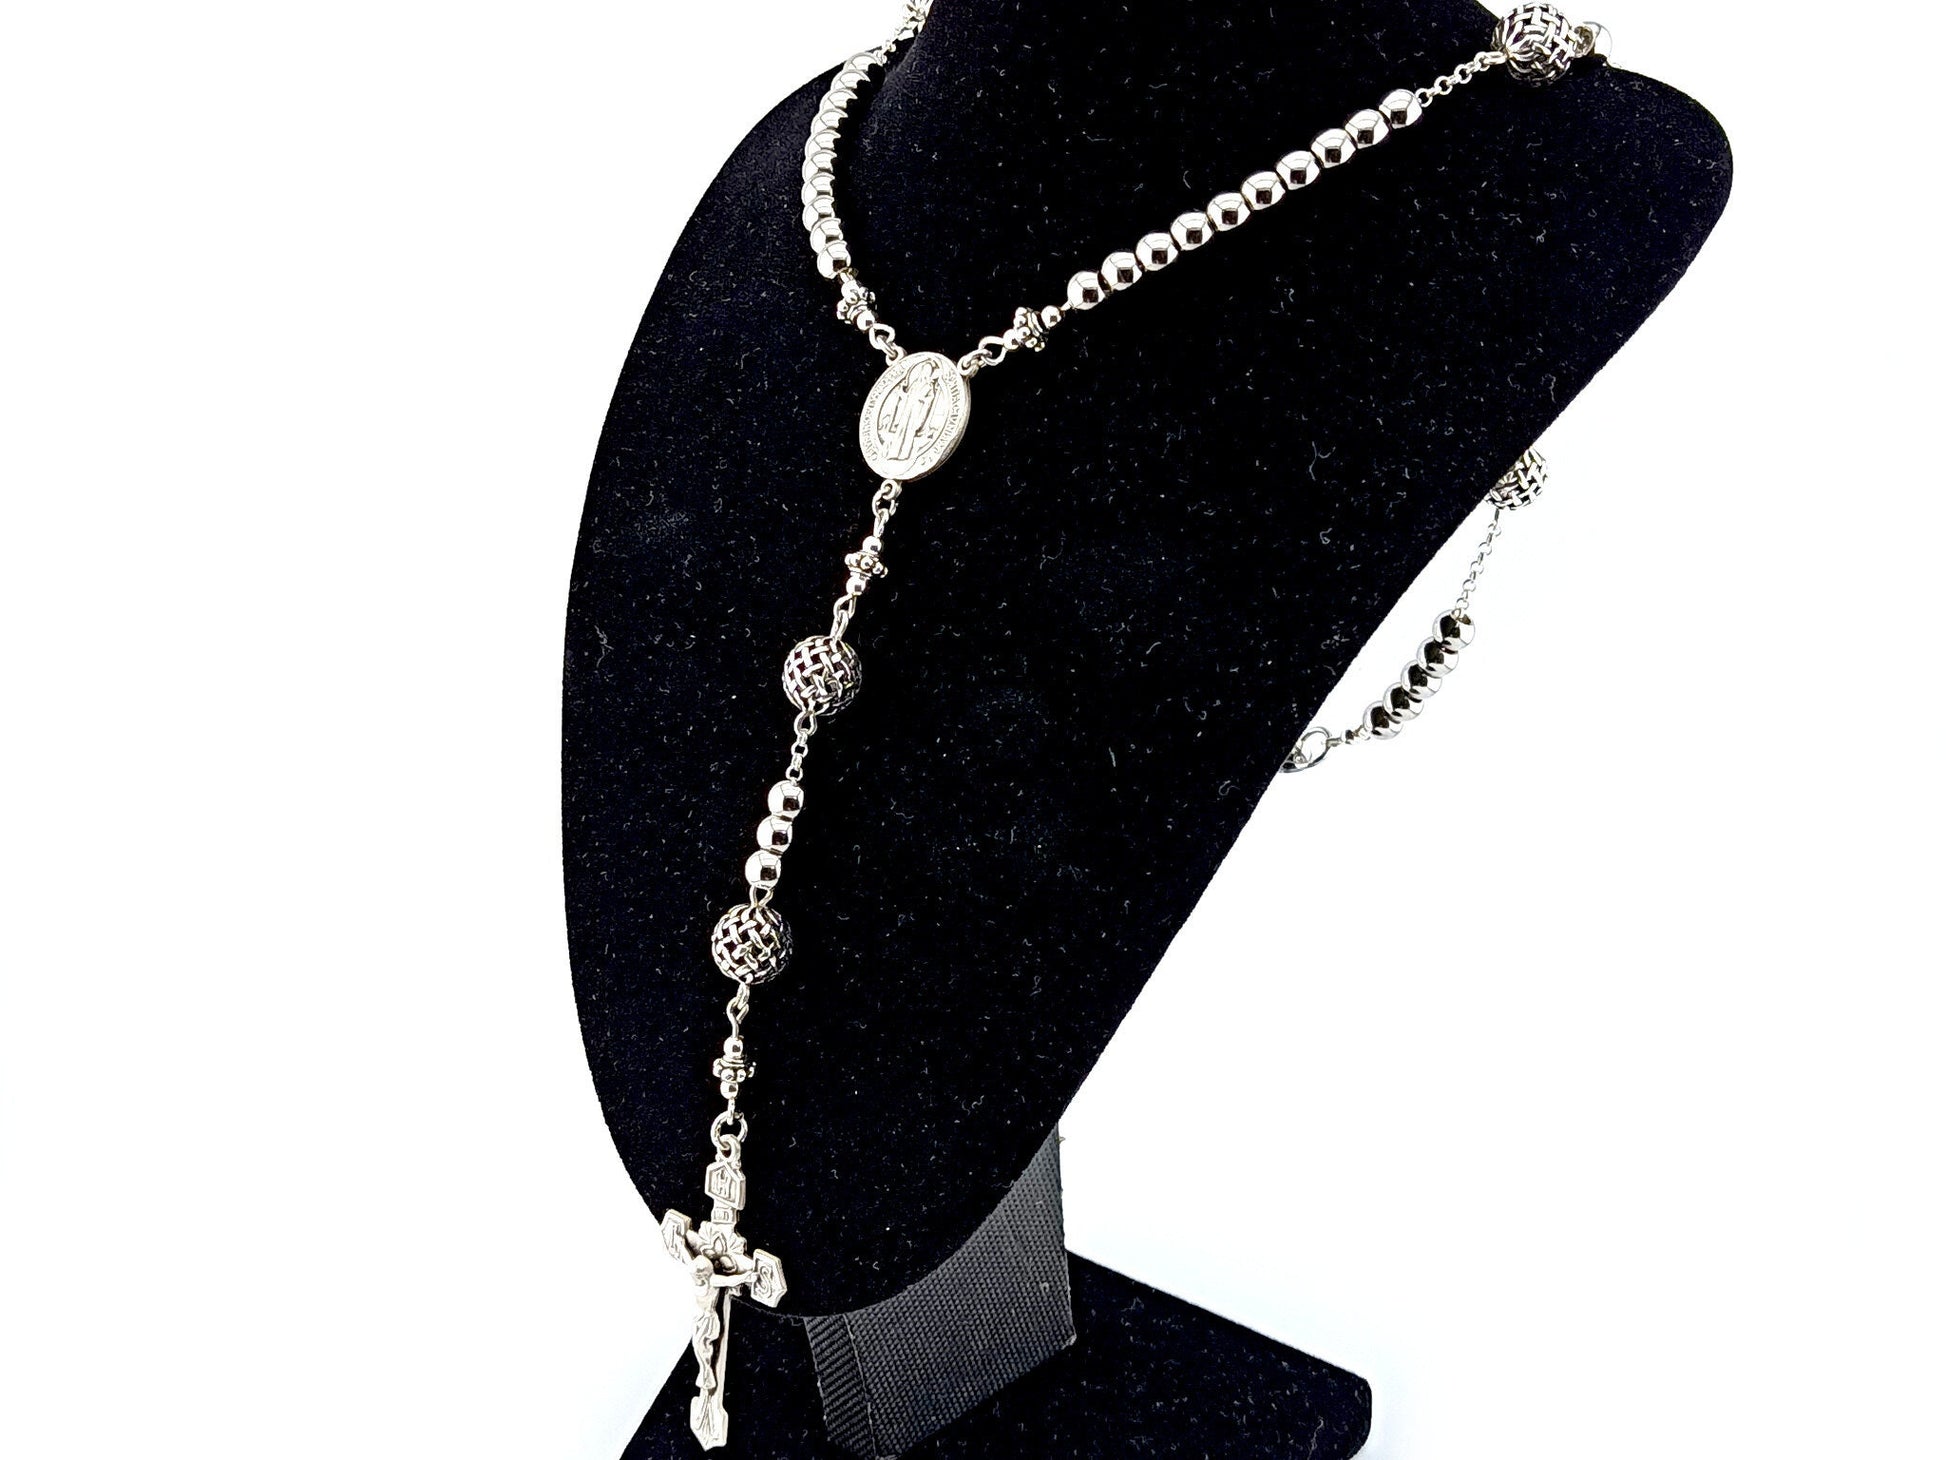 Saint Benedict unique rosary beads 925 sterling silver and stainless steel rosary bead necklace.